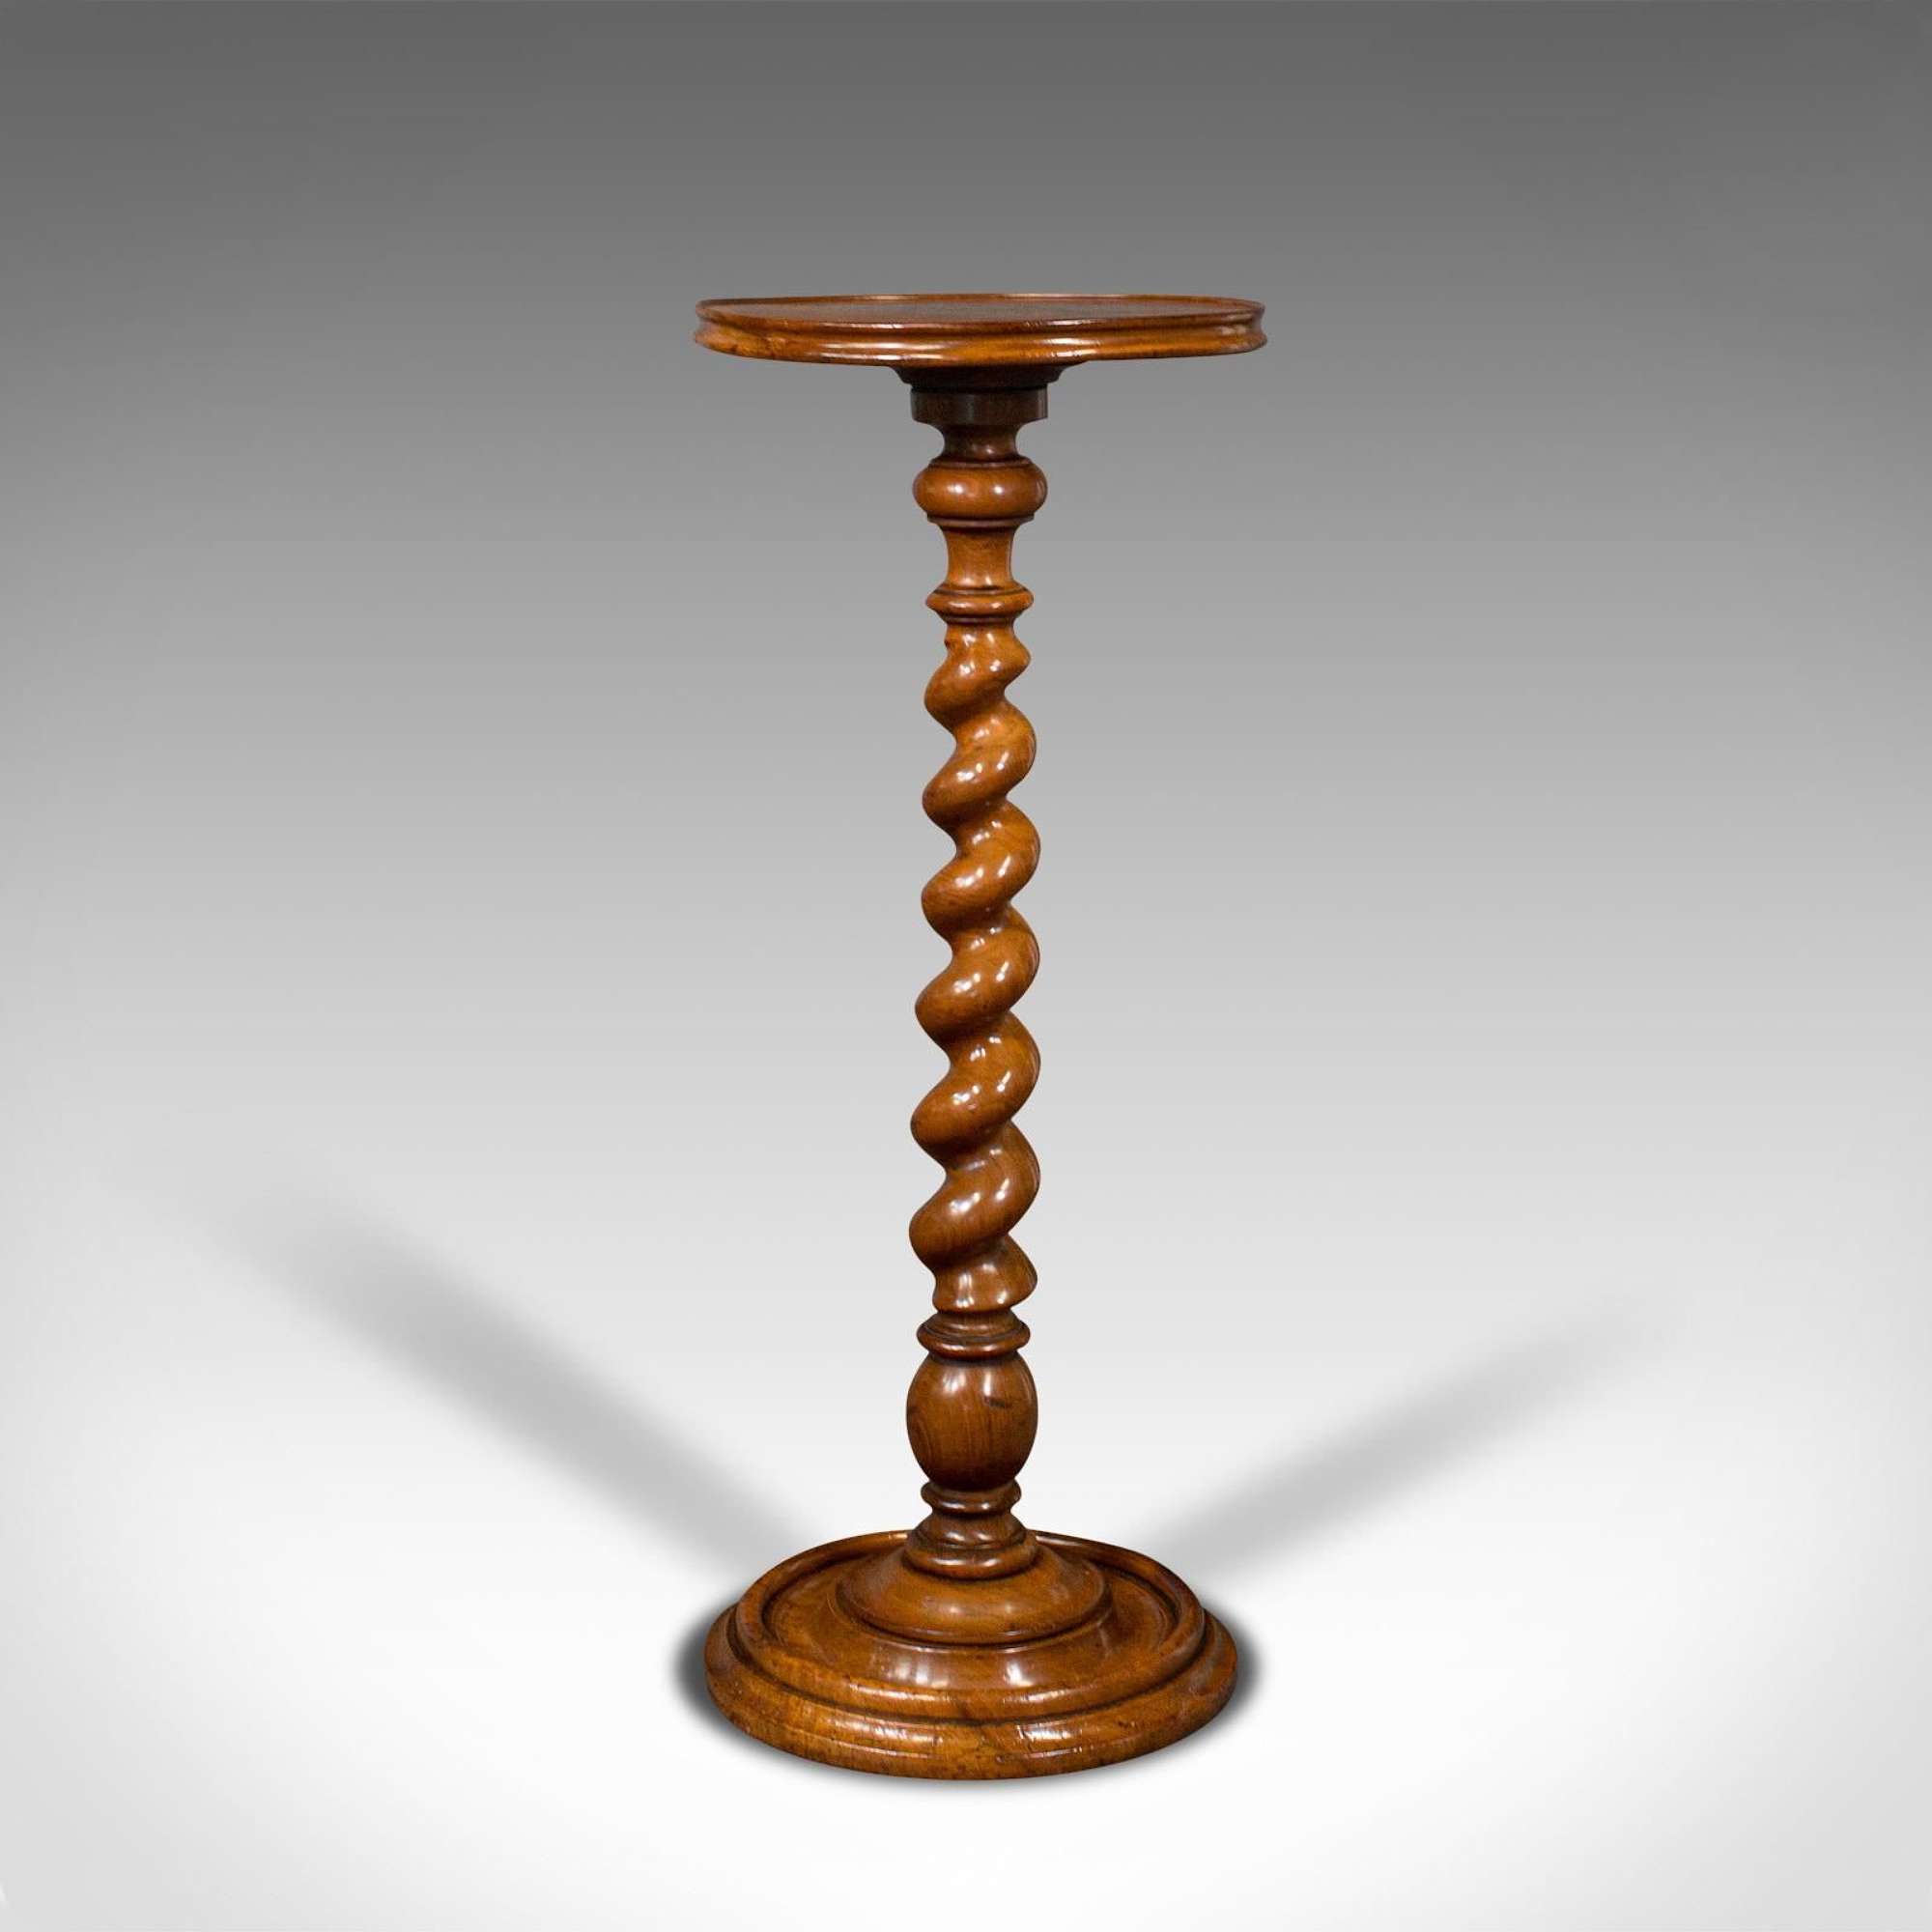 Antique Barley Twist Wine Table, English, Yew, Lamp, Display Stand, Victorian